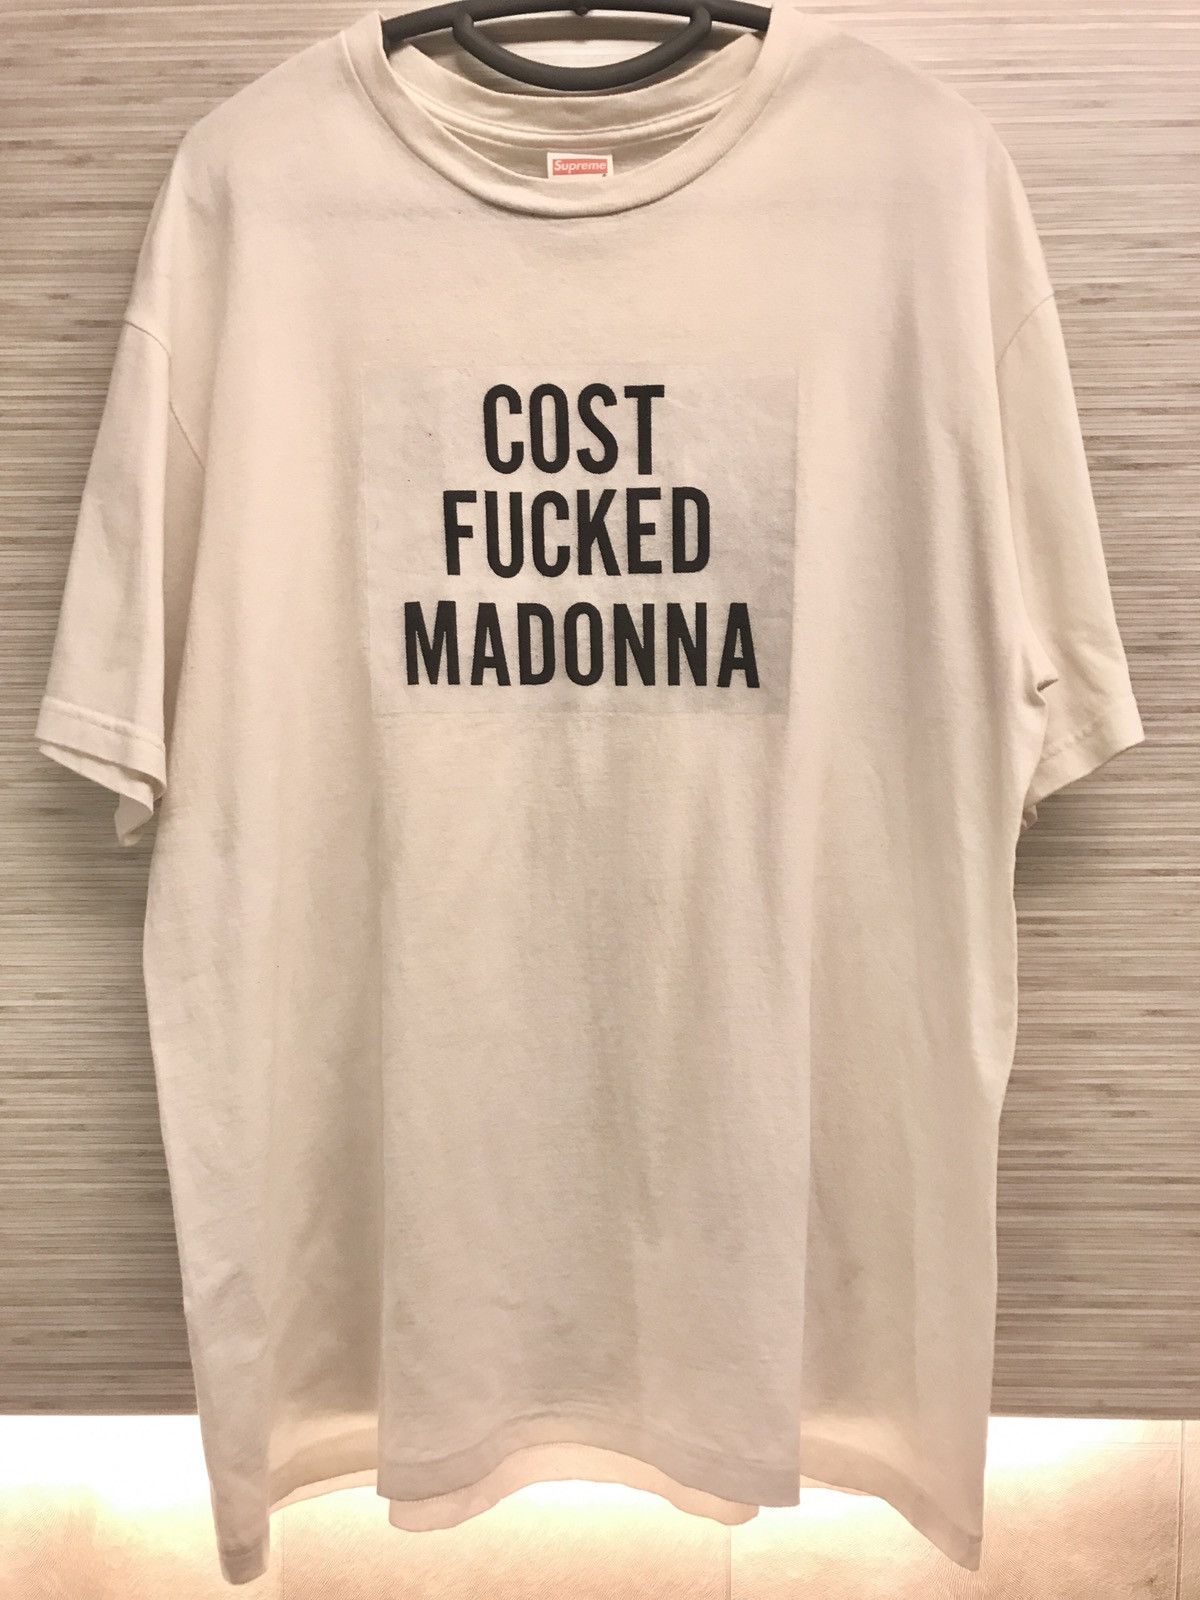 Supreme Cost Fucked Madonna Tee | Grailed